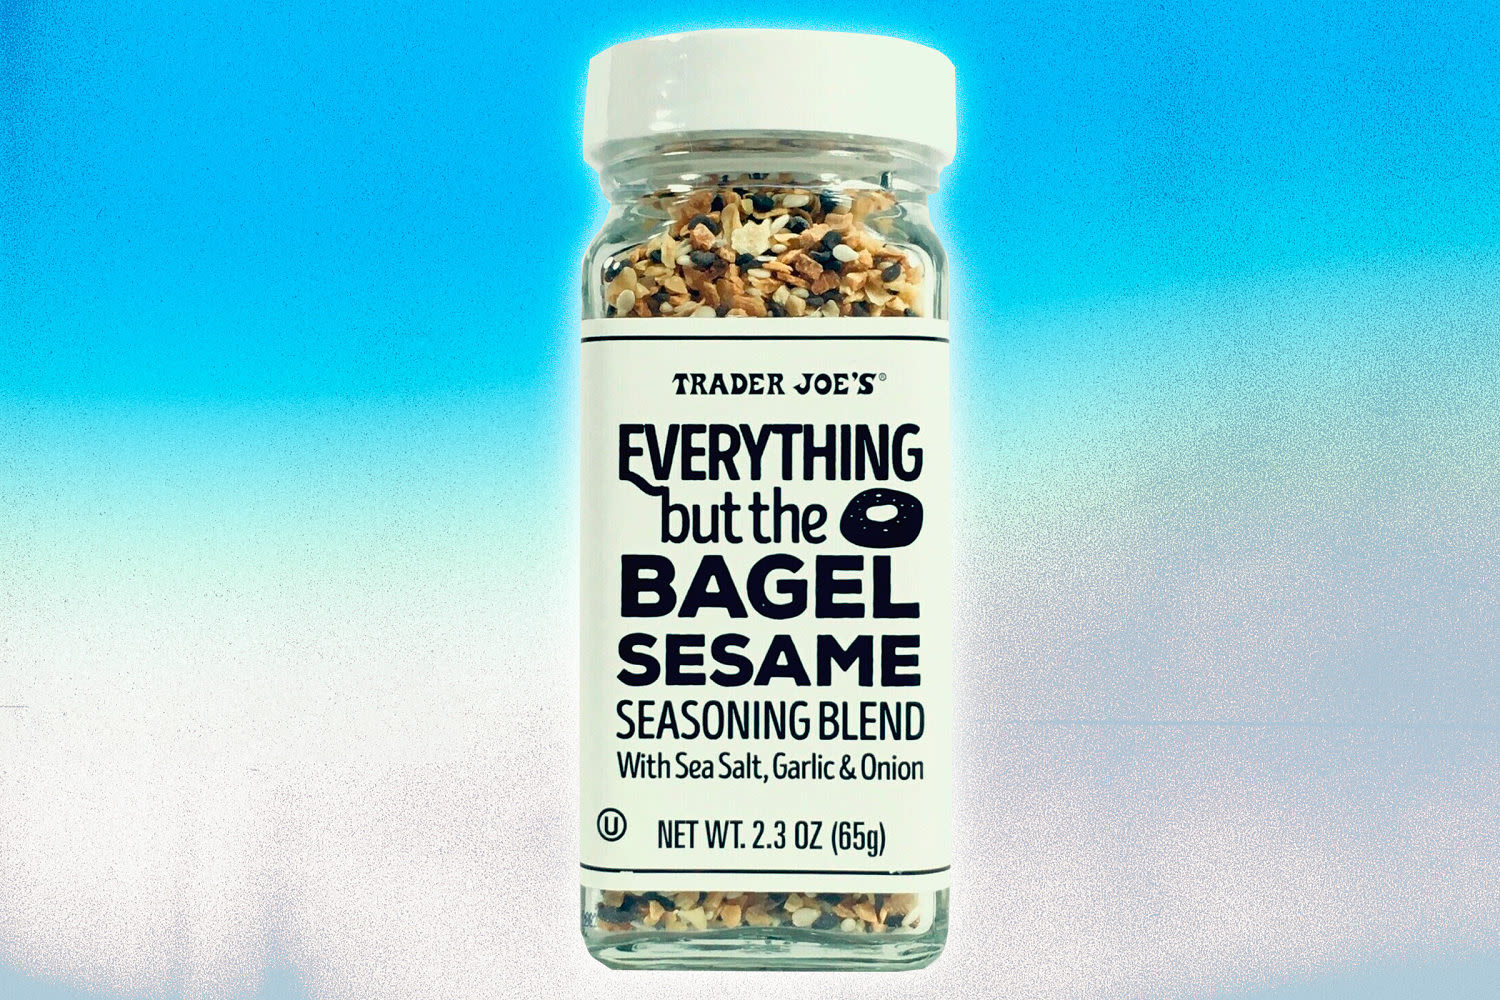 Trader Joe's Everything but the Bagel is being confiscated at the airport in Korea